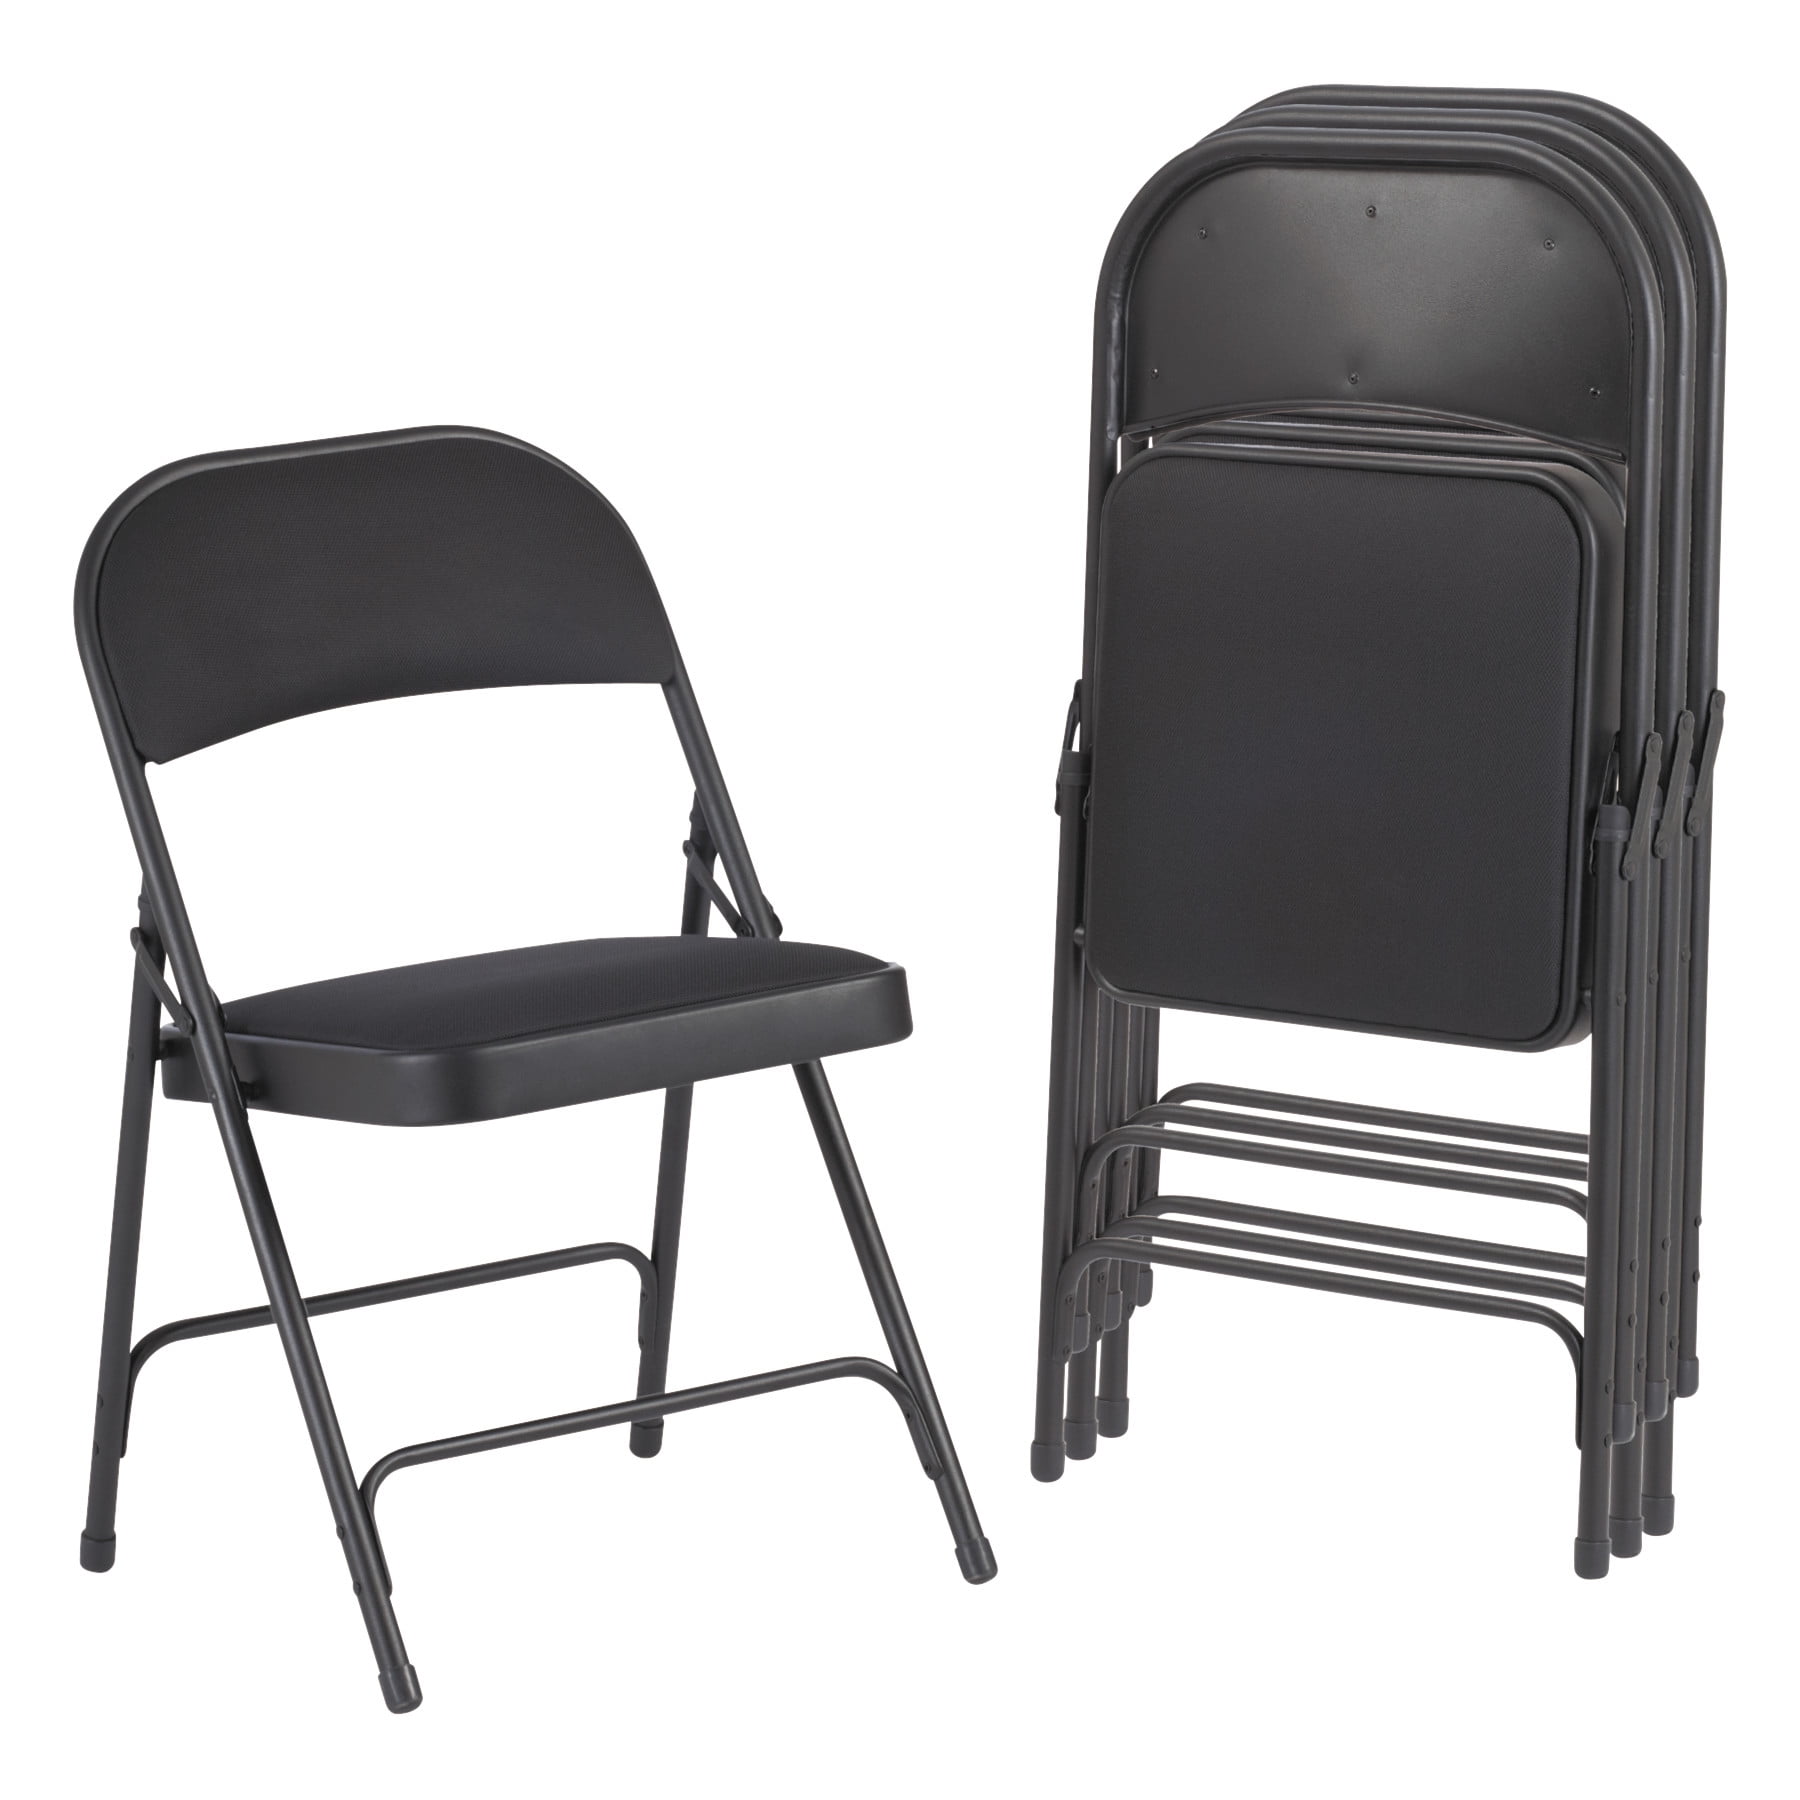 Alera Steel Folding Chair with Two-Brace Support, Fabric Back/Seat